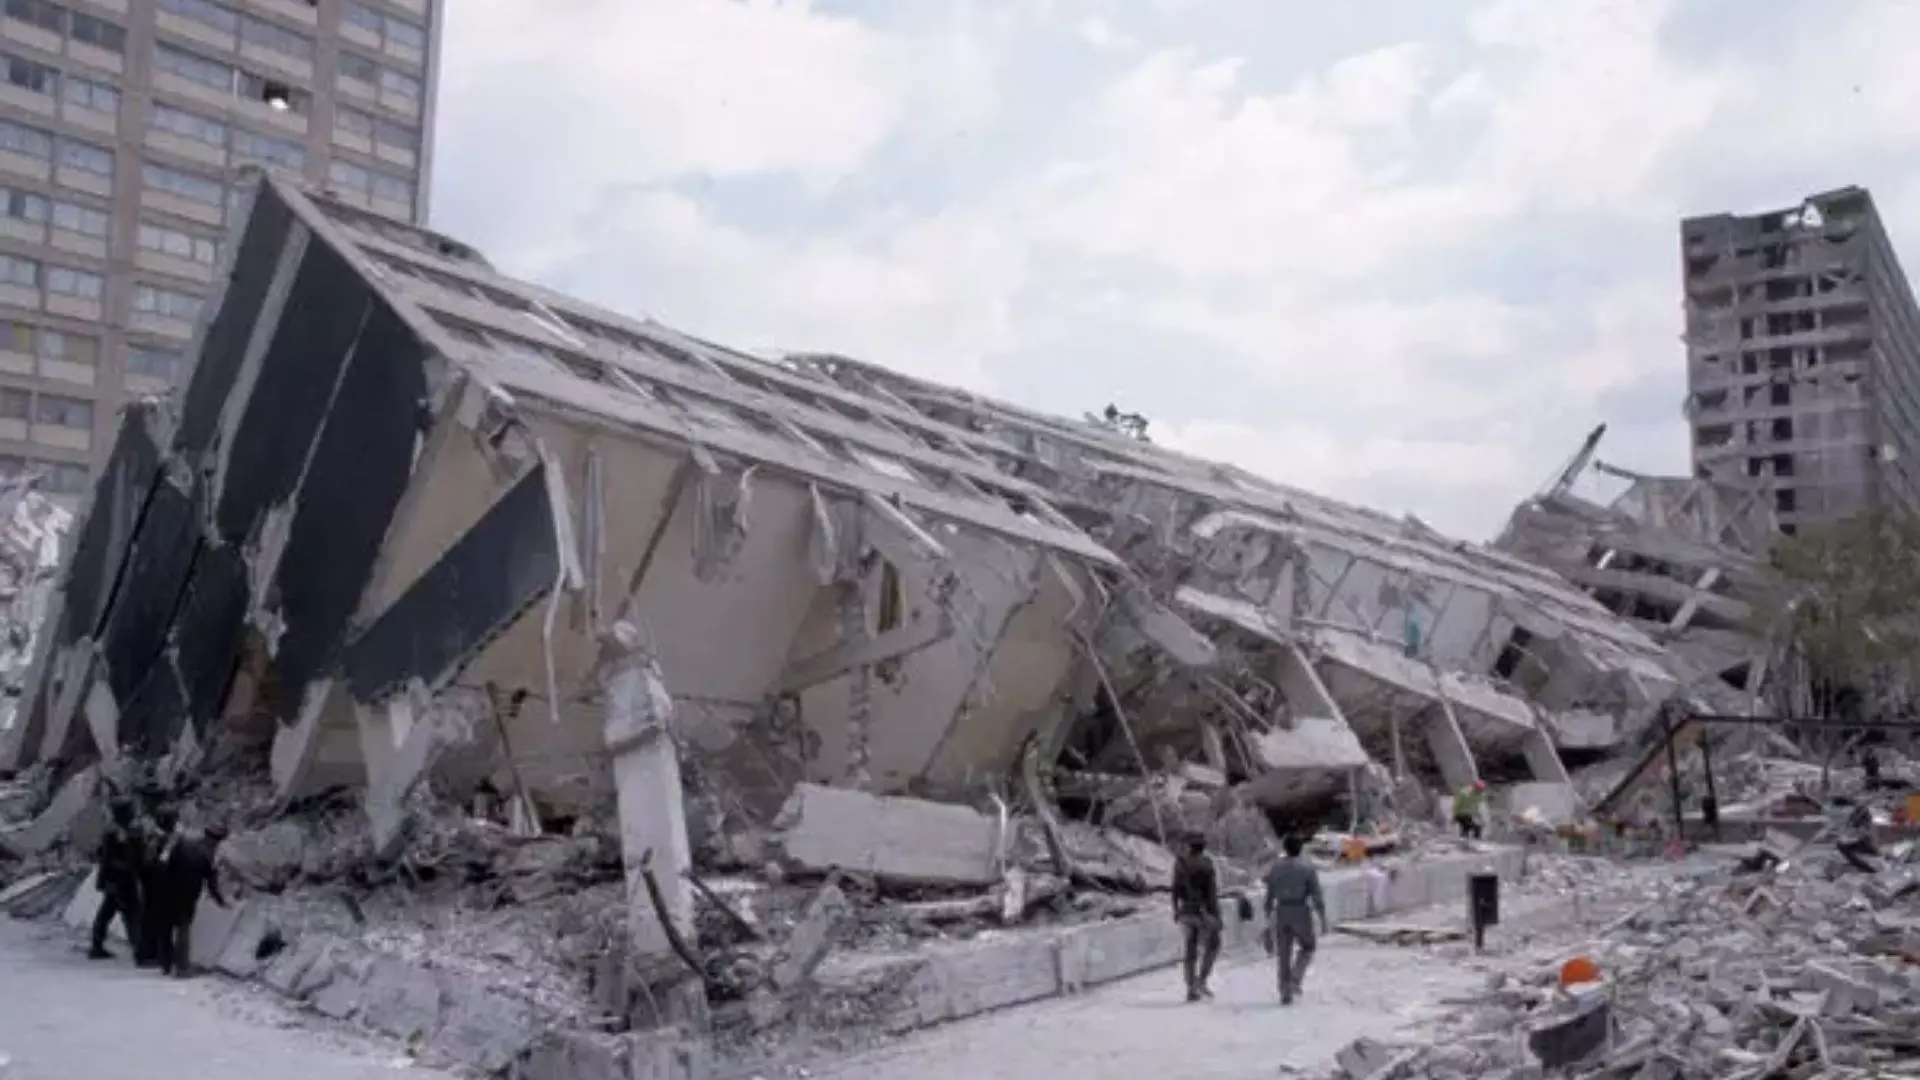 The Magnitude of the Earthquake was 6.9 on the Richter Scale in Mexico